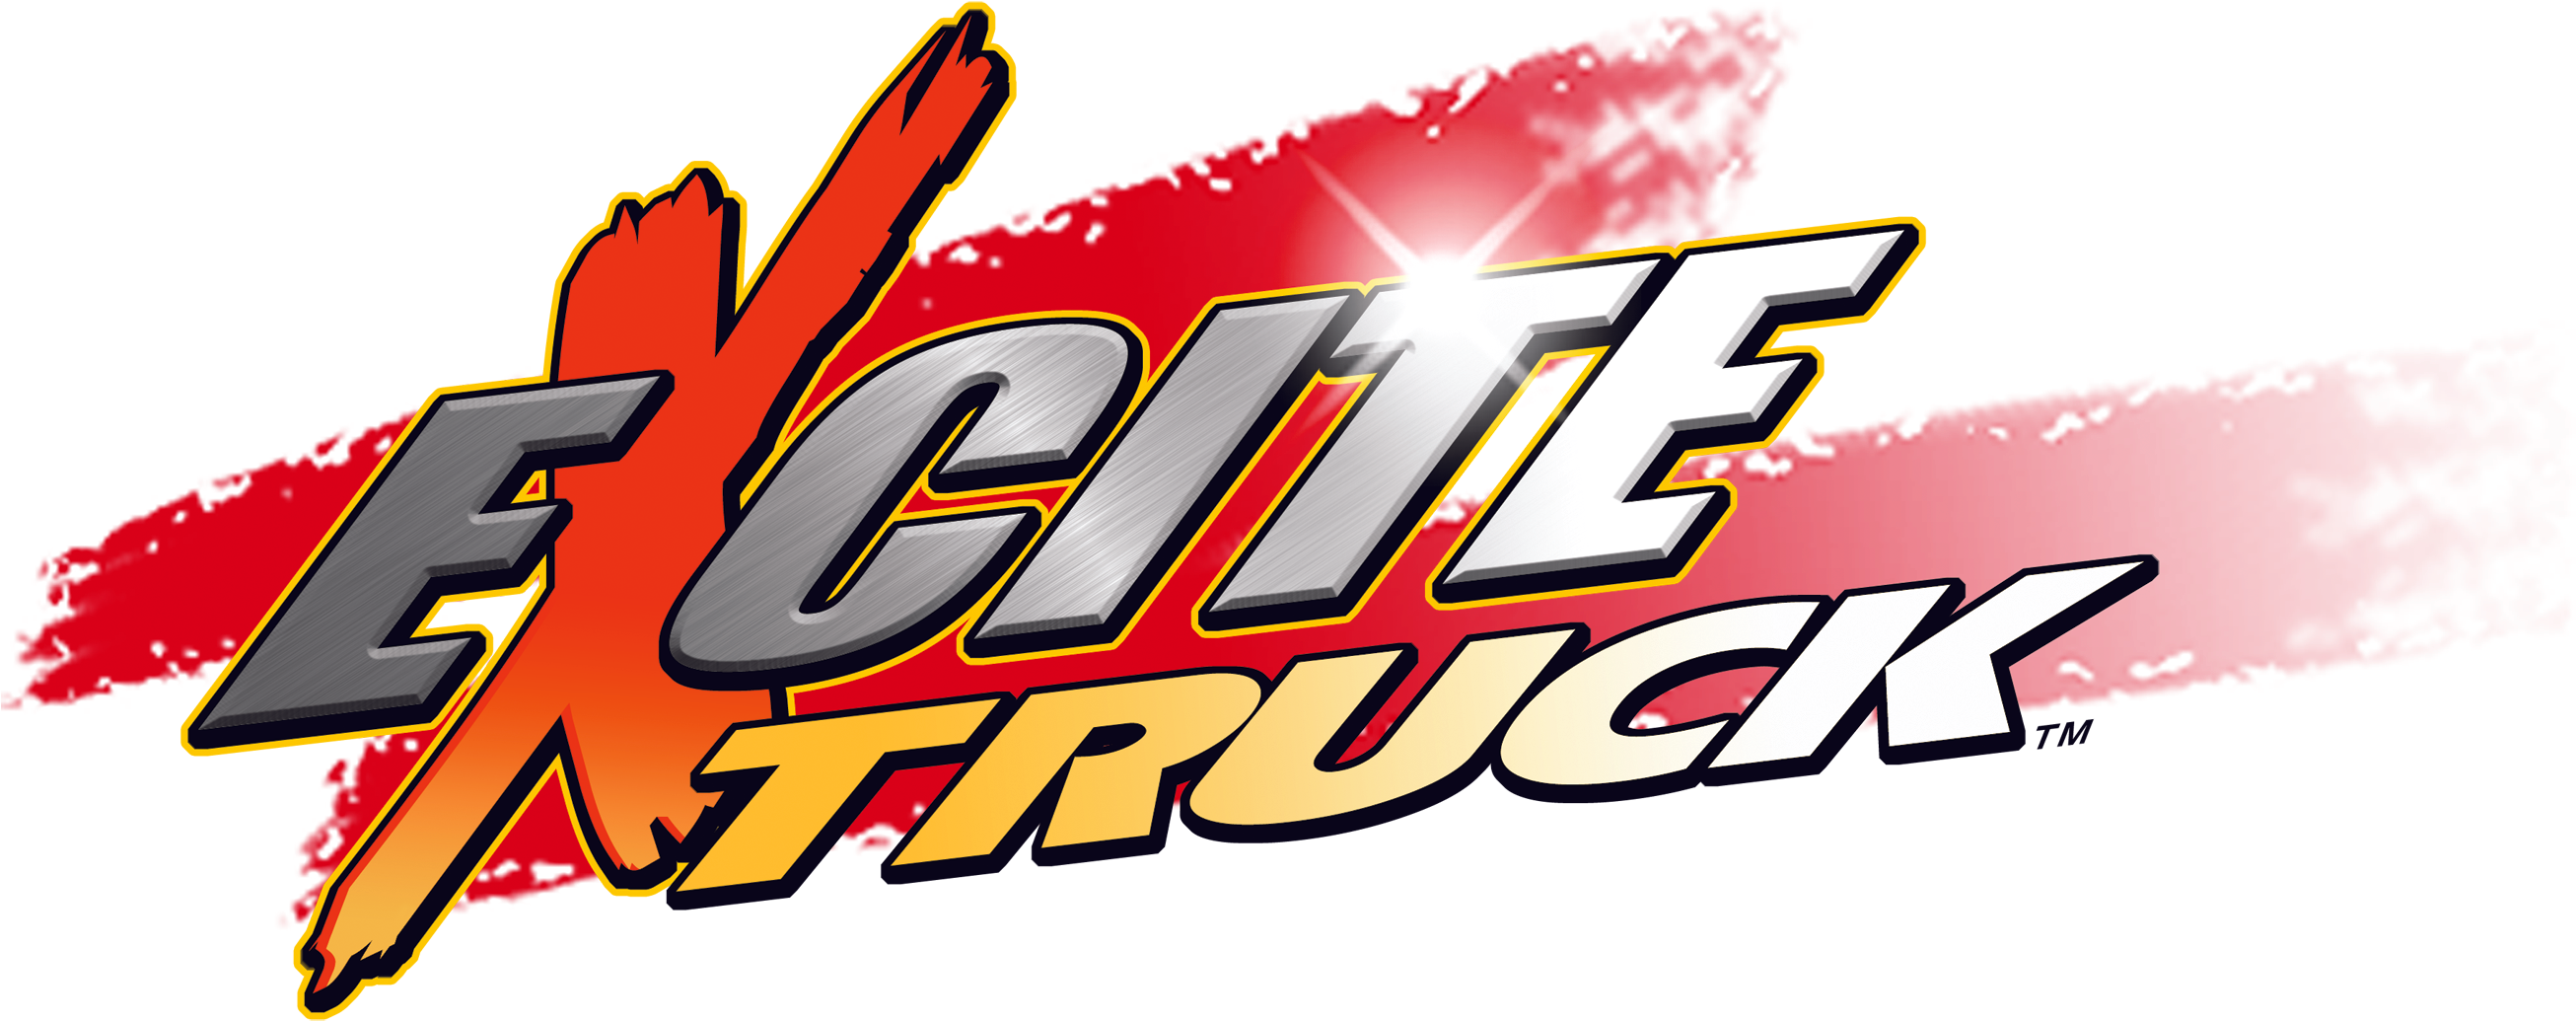 Excite Truck Logo - Excite Truck Wii Logo Clipart (2800x1576), Png Download